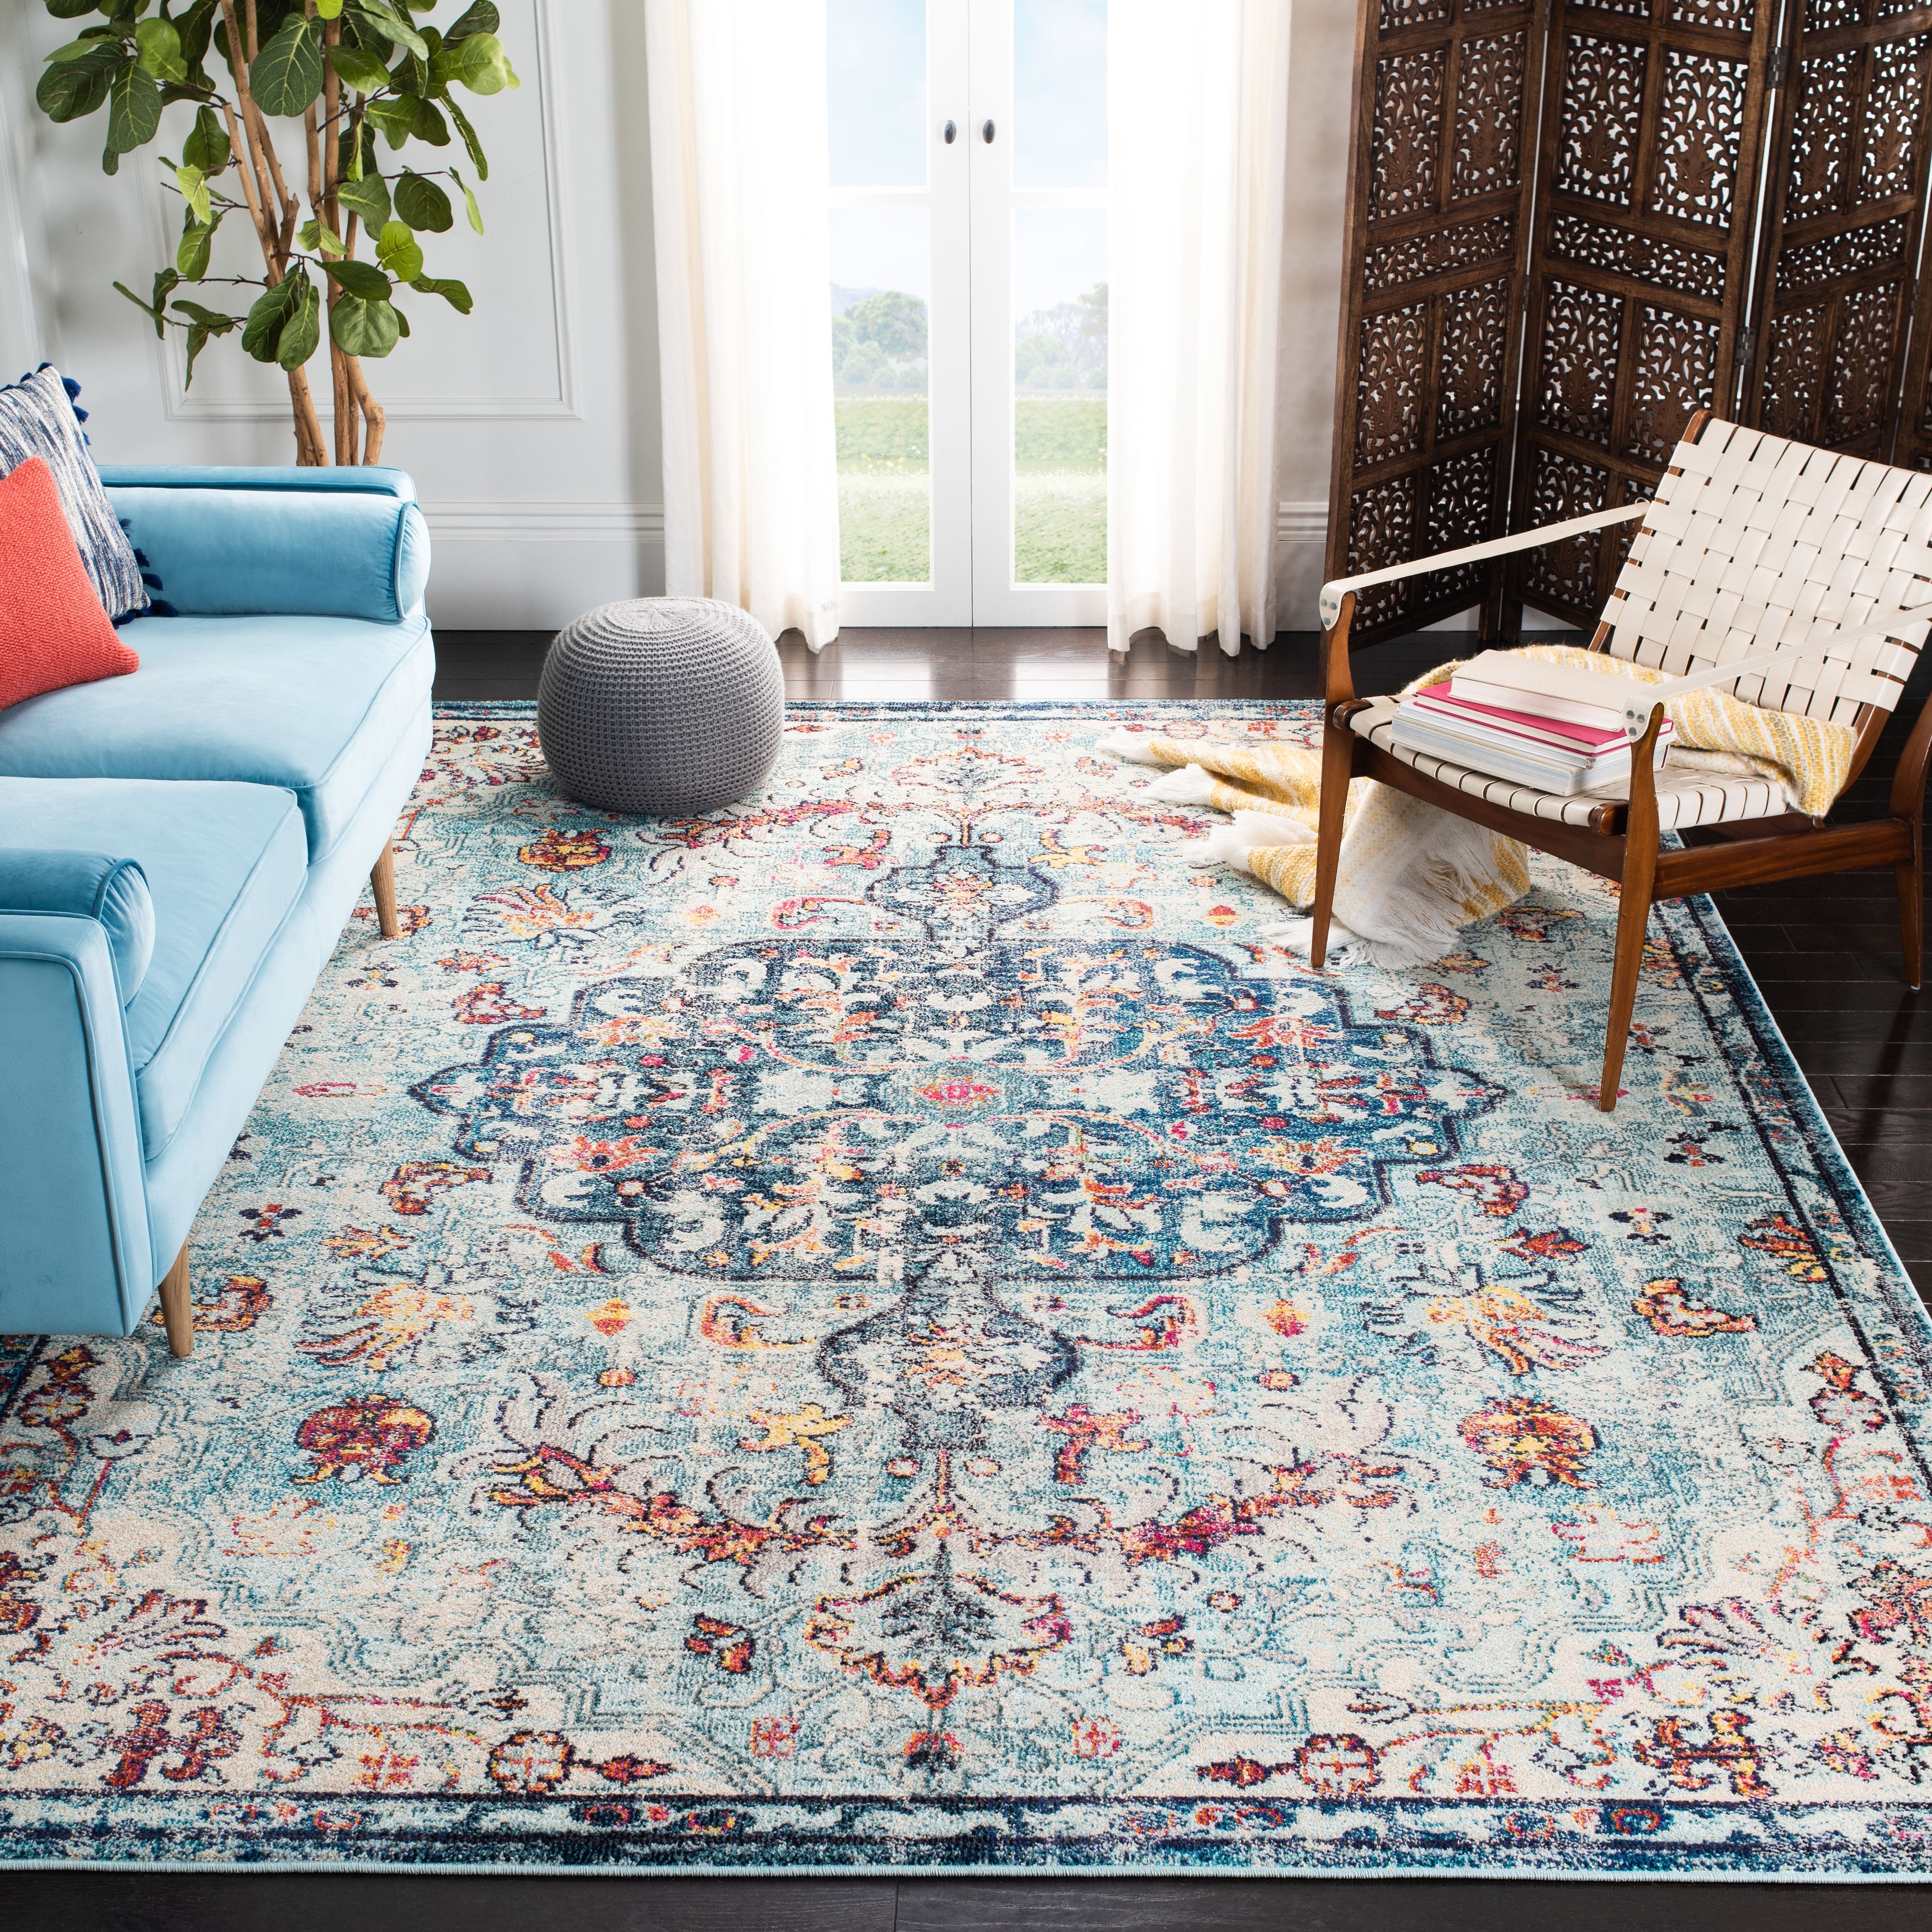 Teal SAFAVIEH Madison Collection MAD447Z Boho Chic Medallion Distressed Non-Shedding Living Room Bedroom Dining Home Office Area Rug 9' x 12' Black